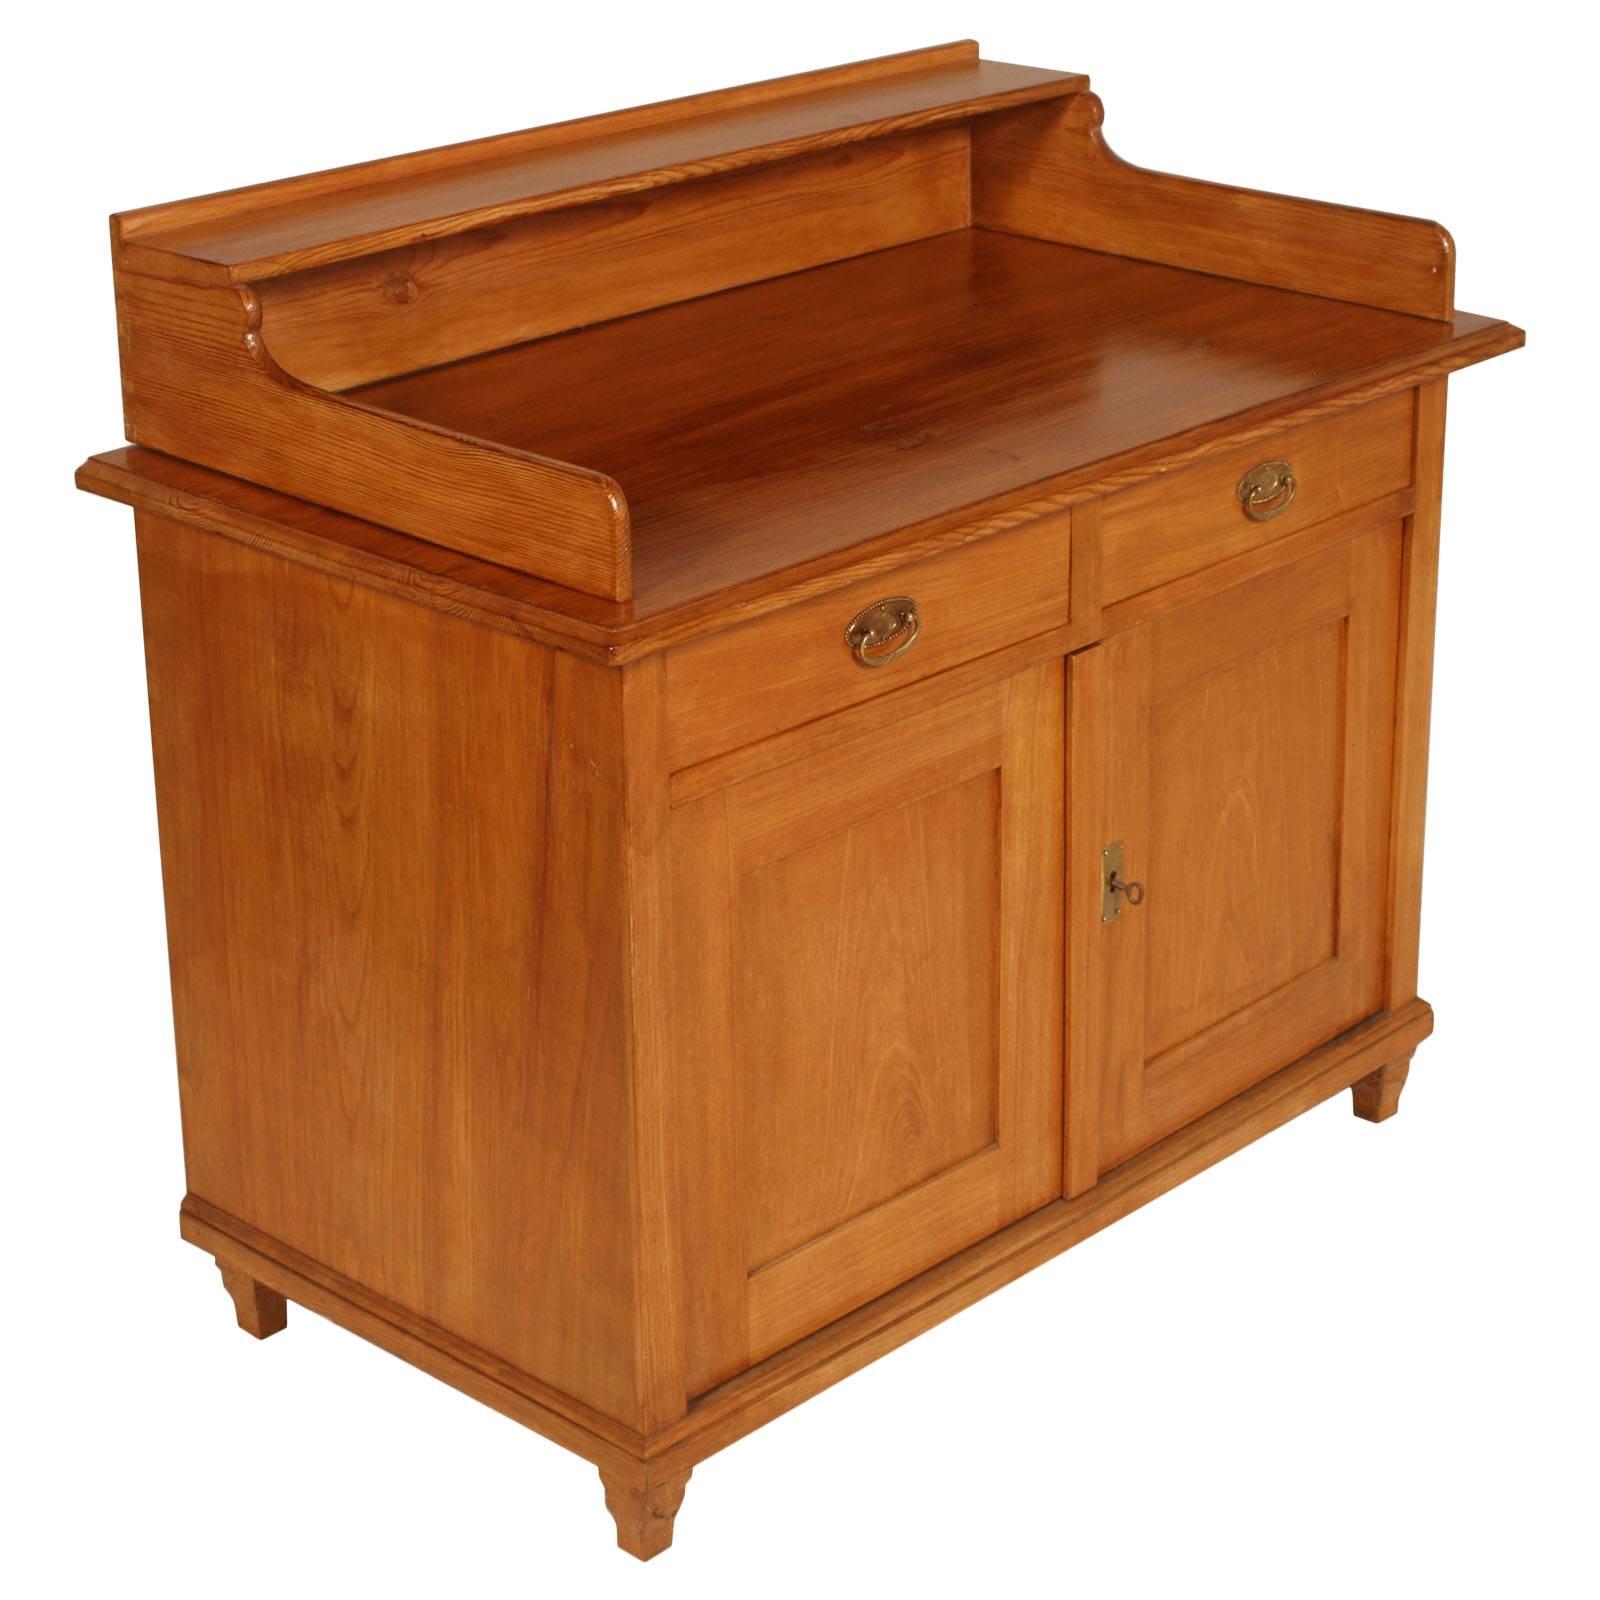 Late 19th Century Tyrolean Credenza Vanity Sideboard in solid Larch wax polished